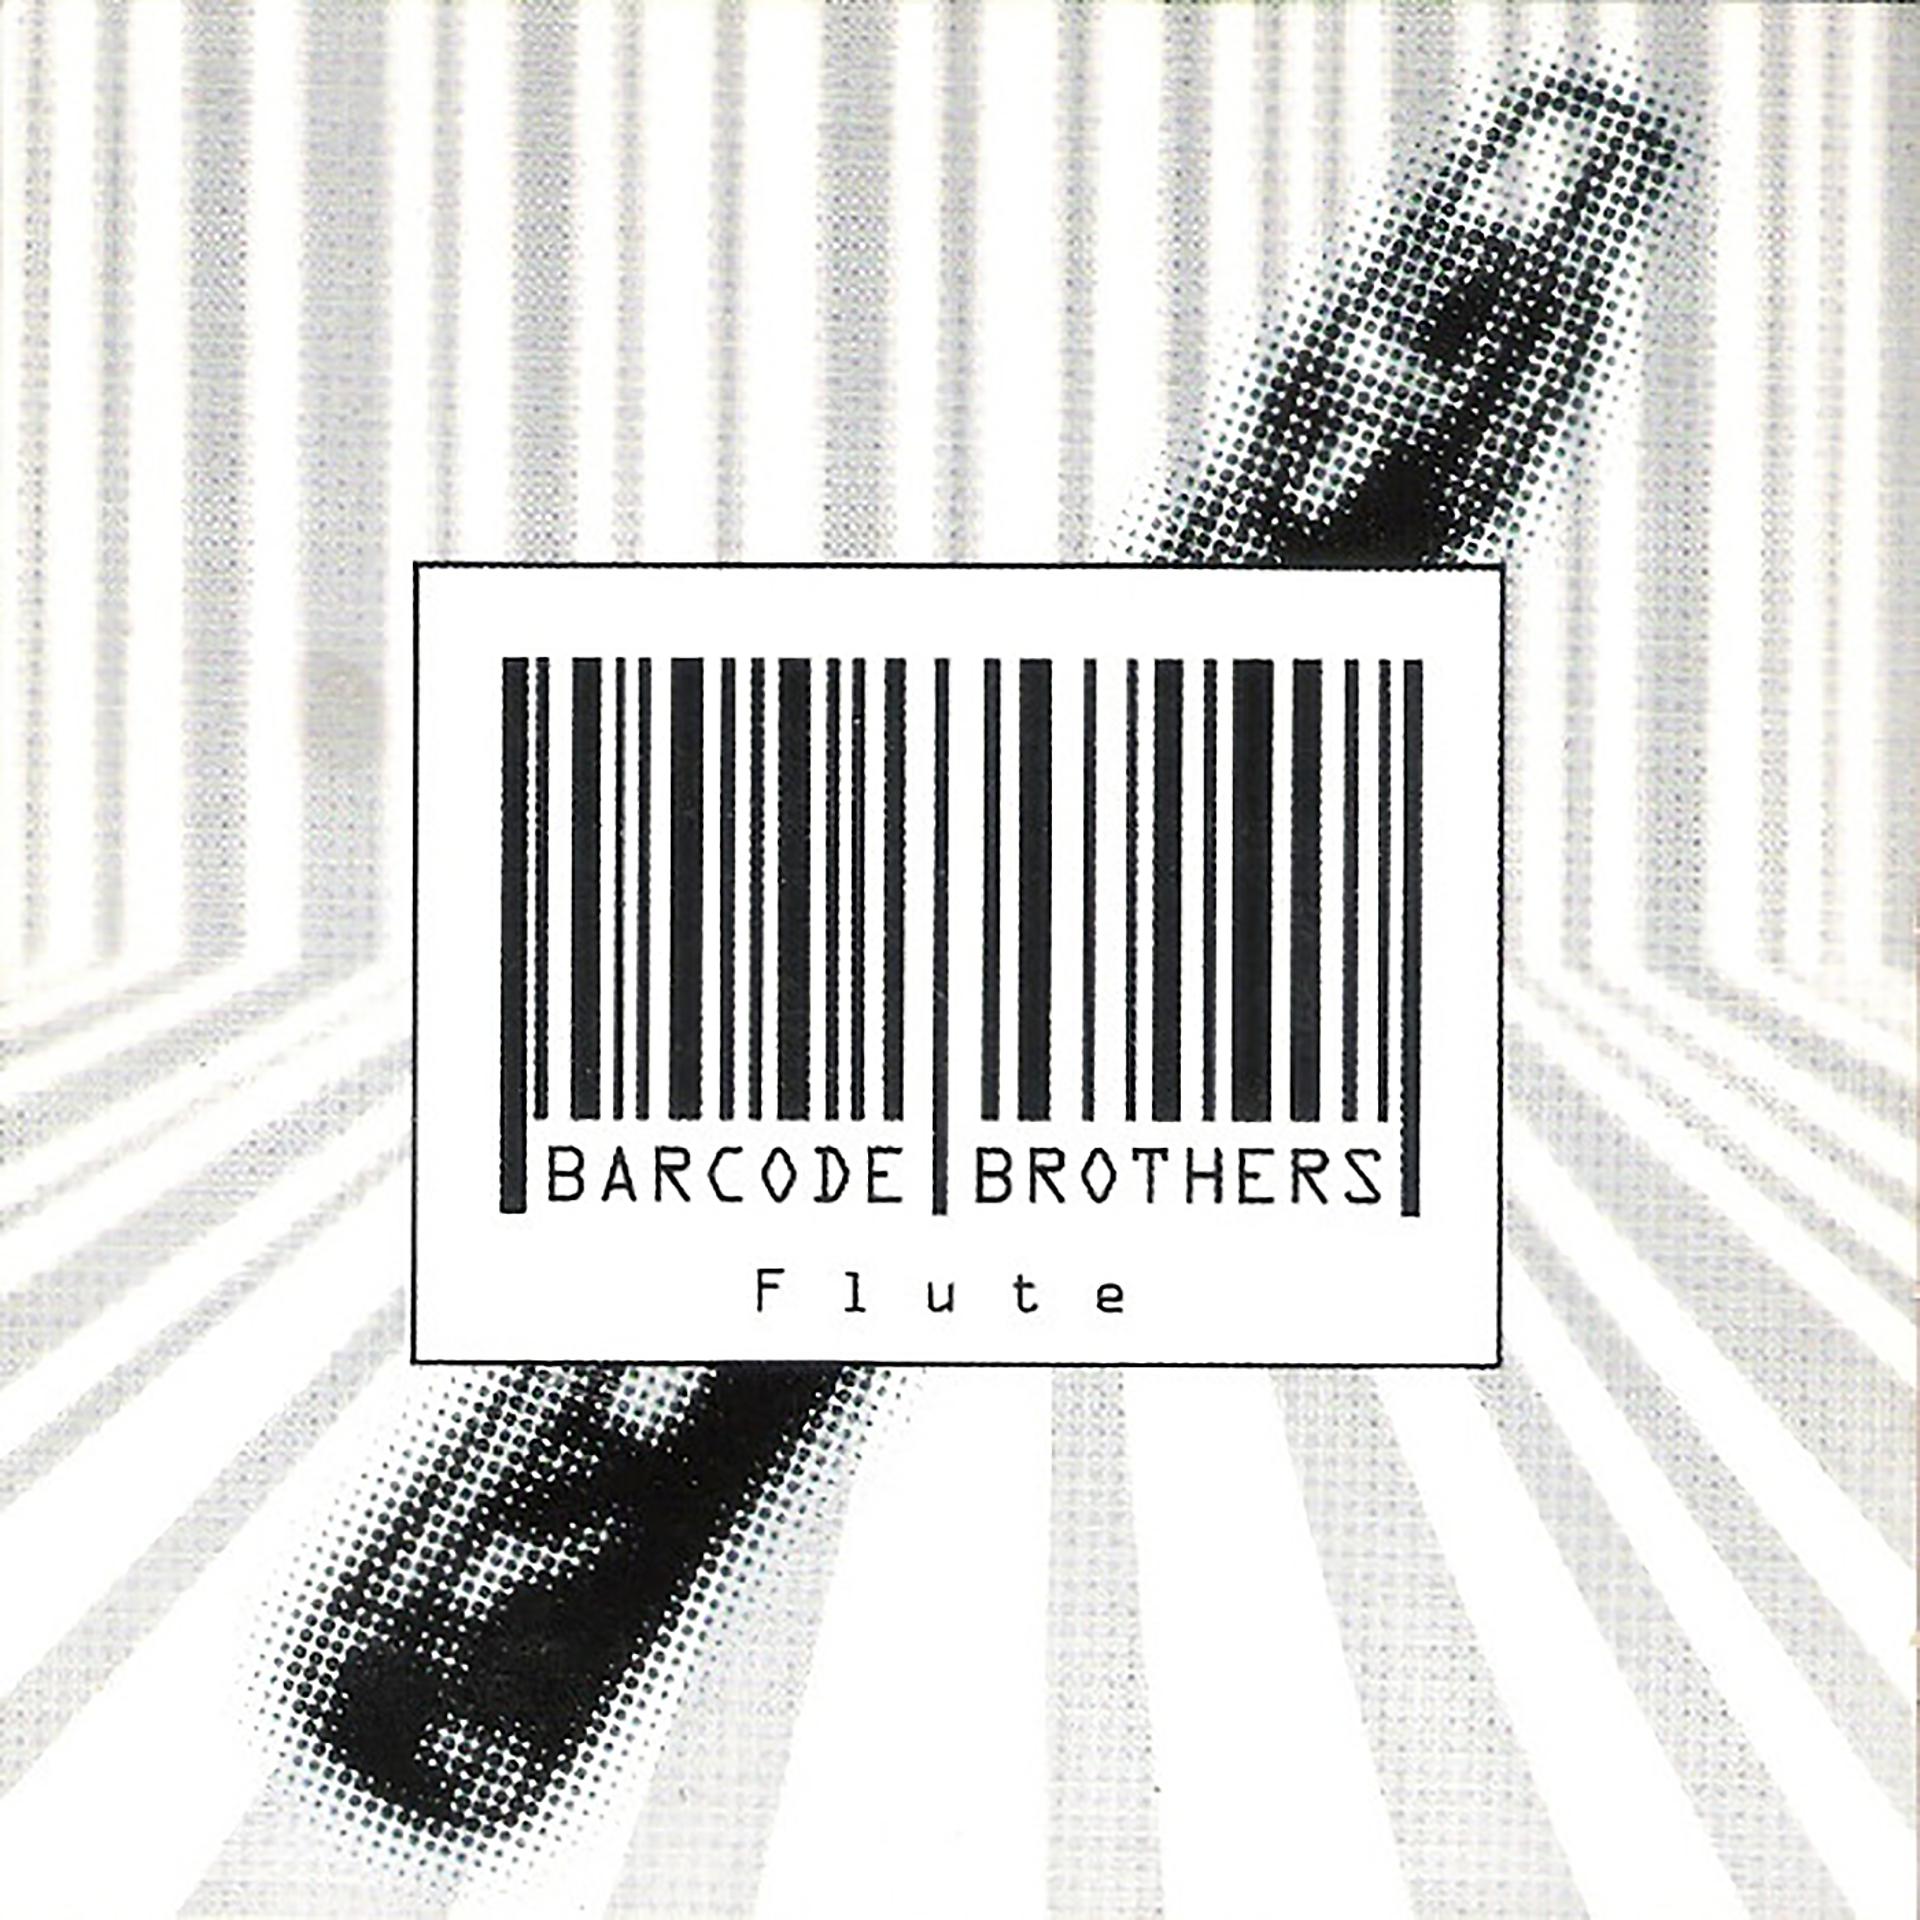 Brother sms. Barcode brothers. Flute Barcode brothers. Обложка Barcode brothers SMS. Группа Barcode brothers.